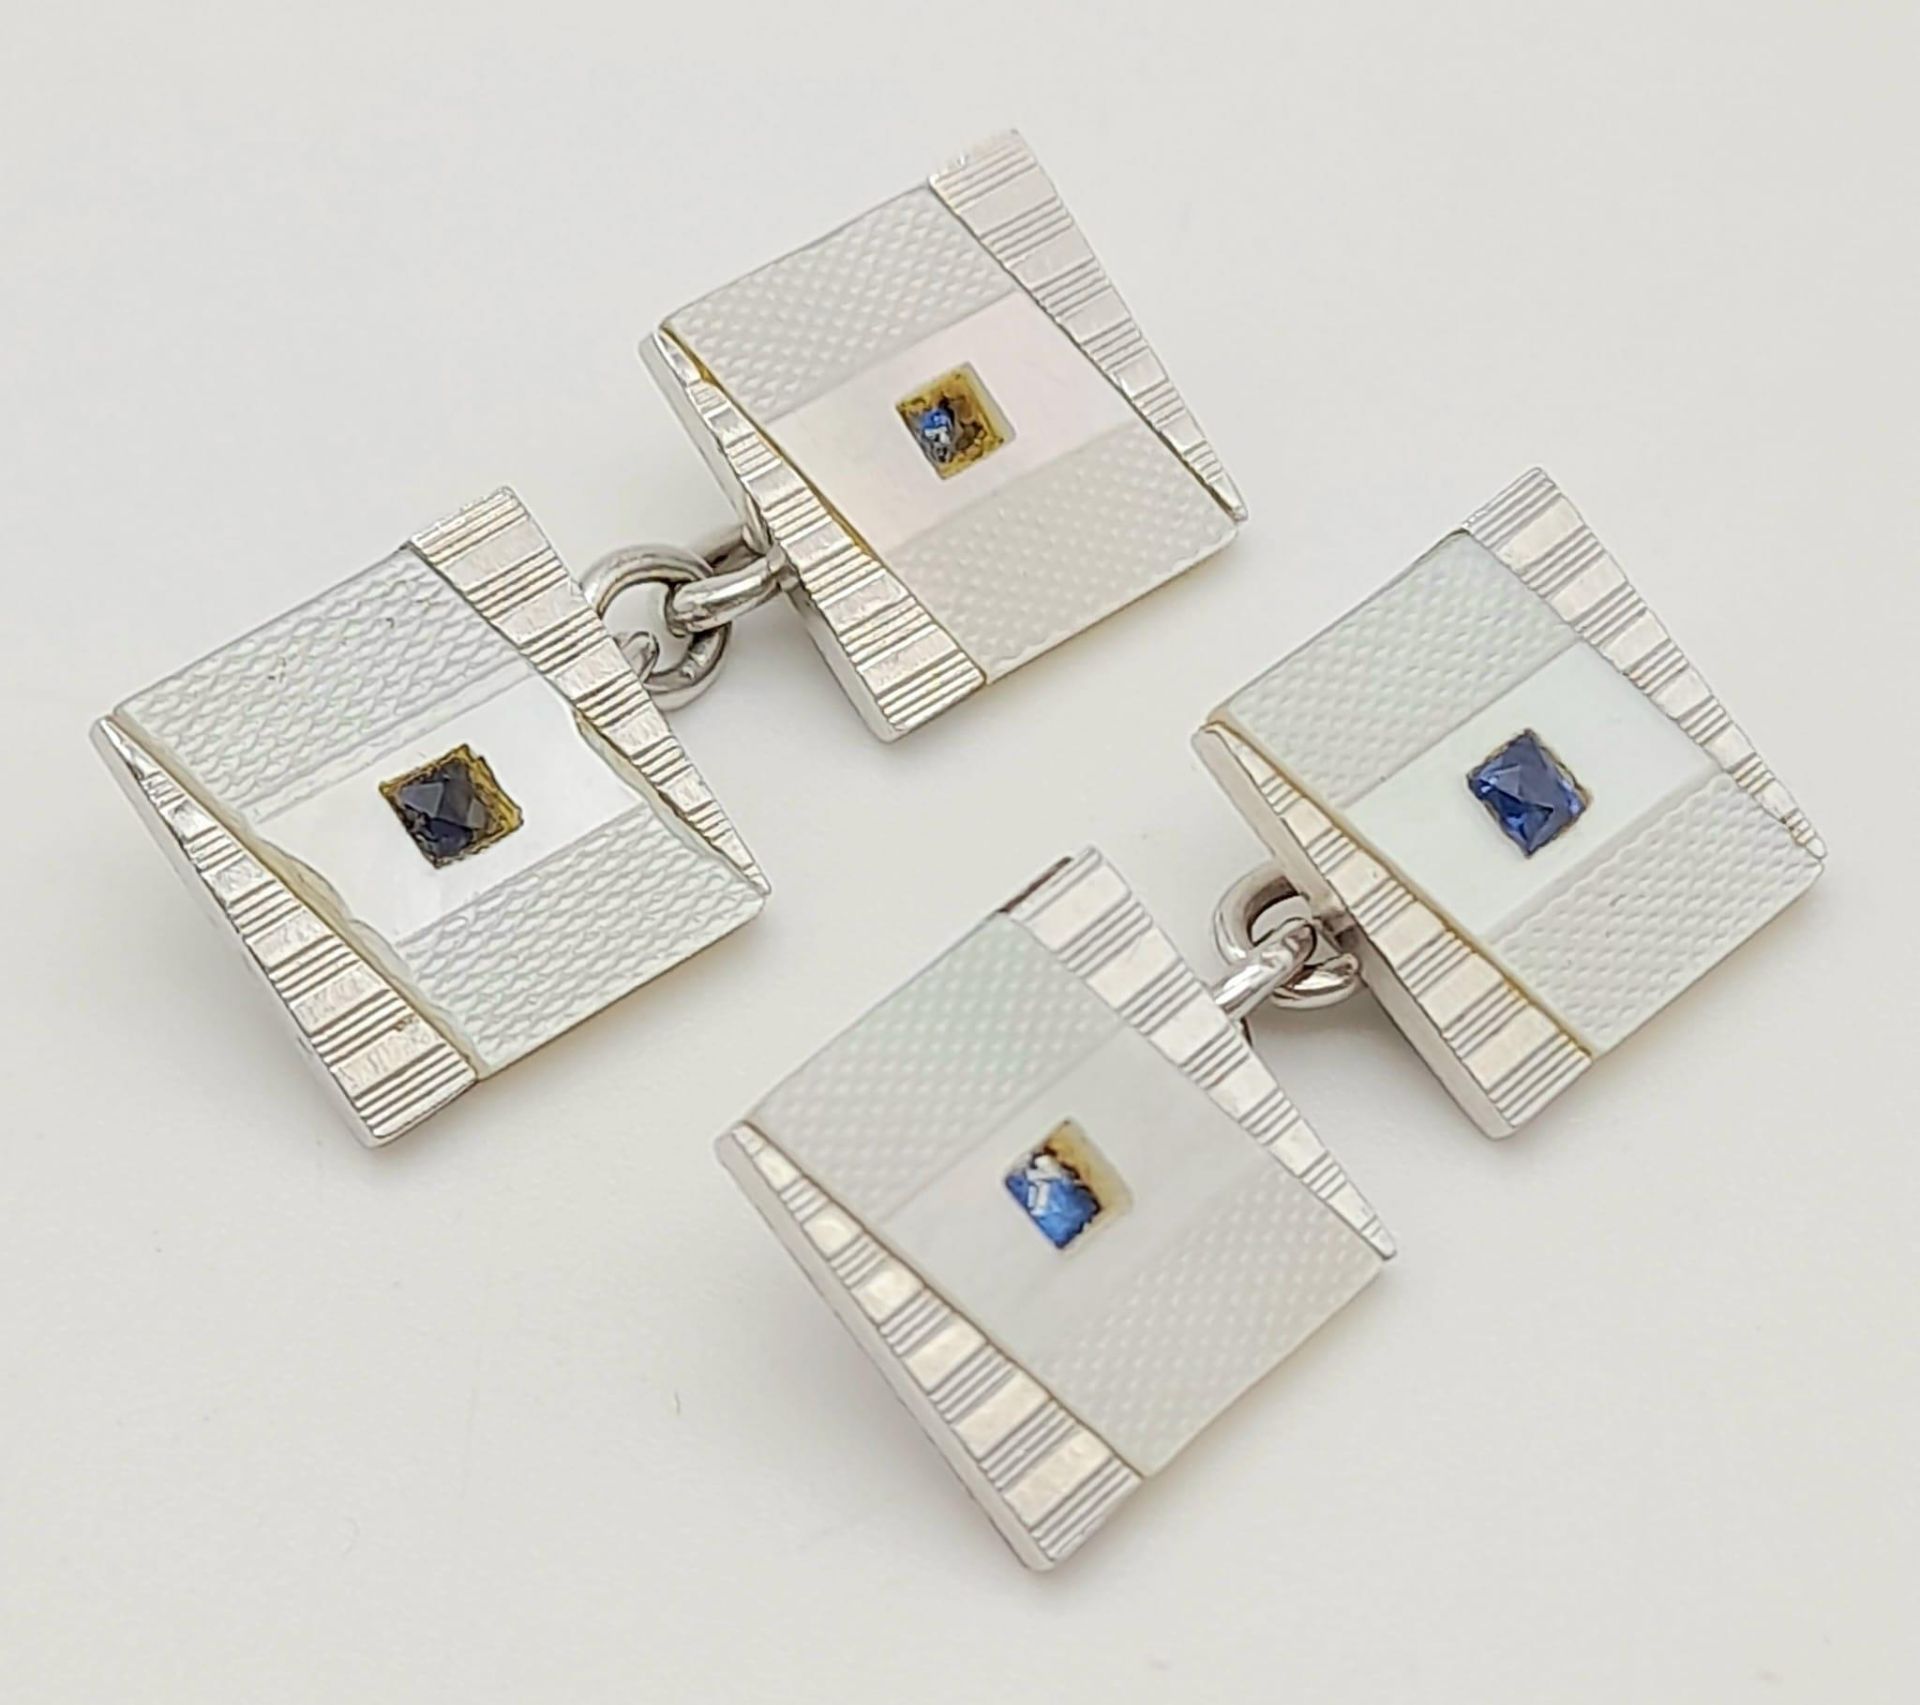 Pair of 9k white gold cufflinks, mother of pearl decorated square faces, weight 5.7g ref 13229 - Image 2 of 4